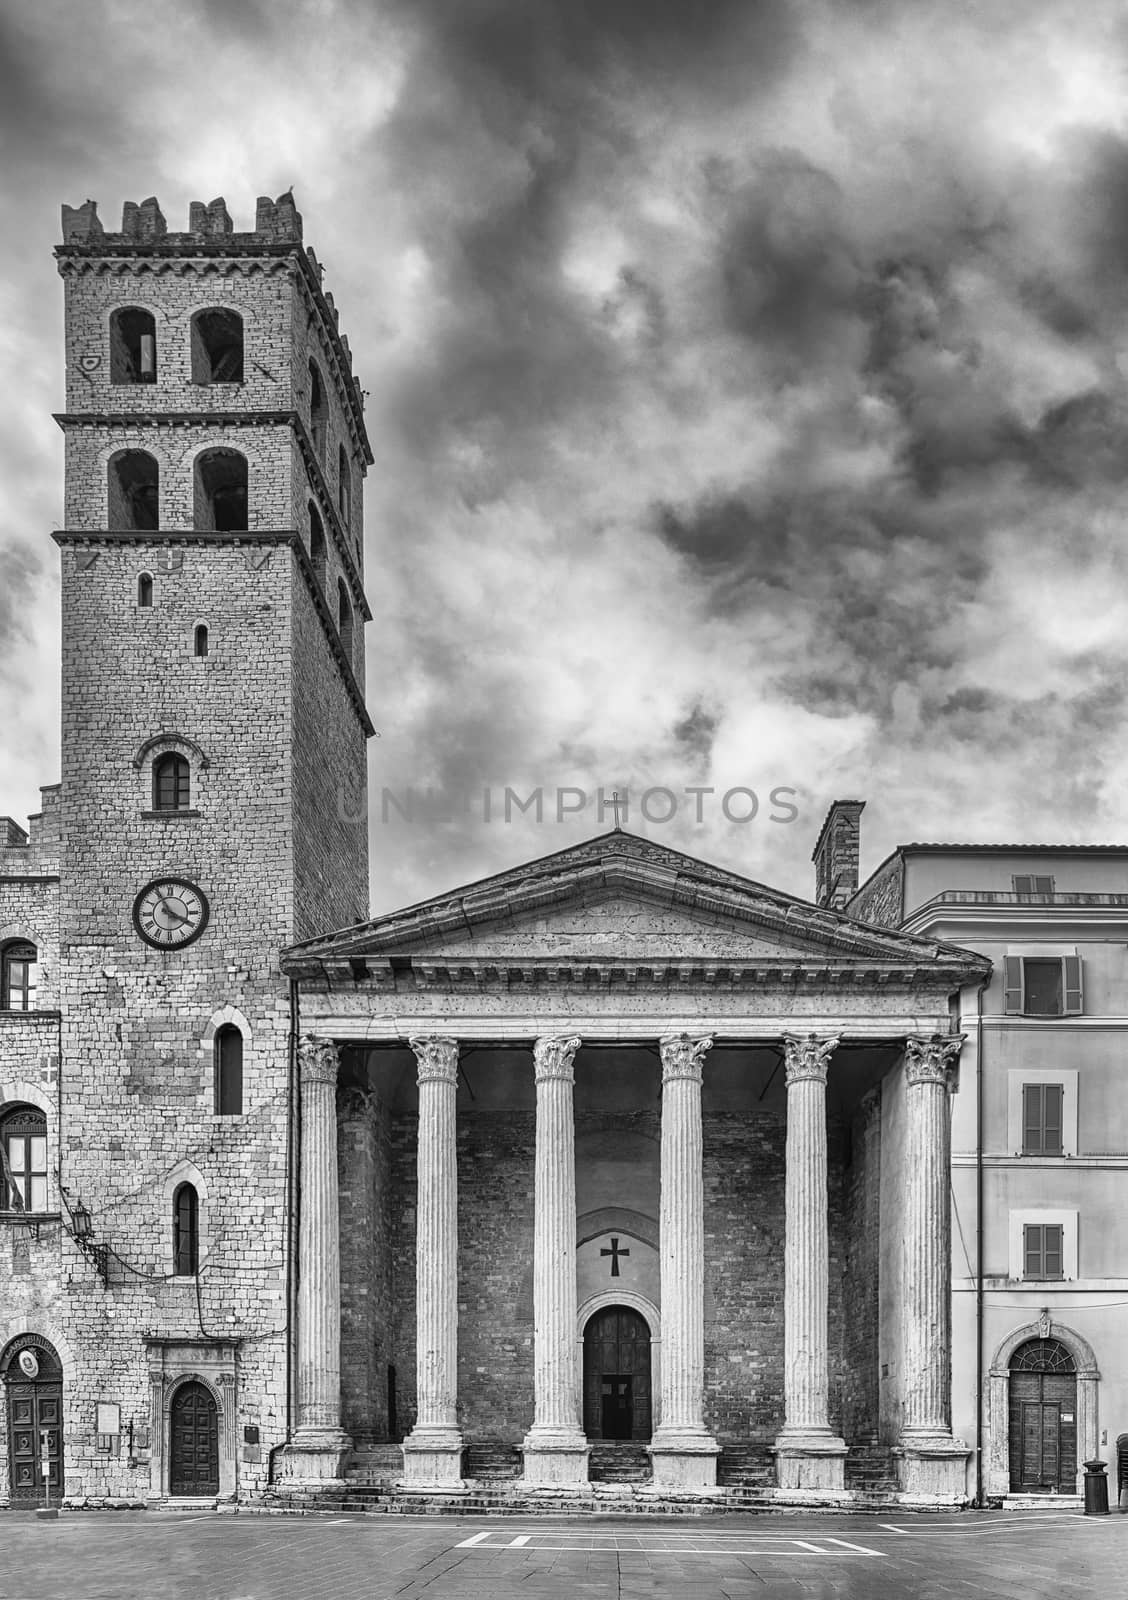 Facade of Temple of Minerva,  ancient Roman building and iconic landmark in Assisi, Italy